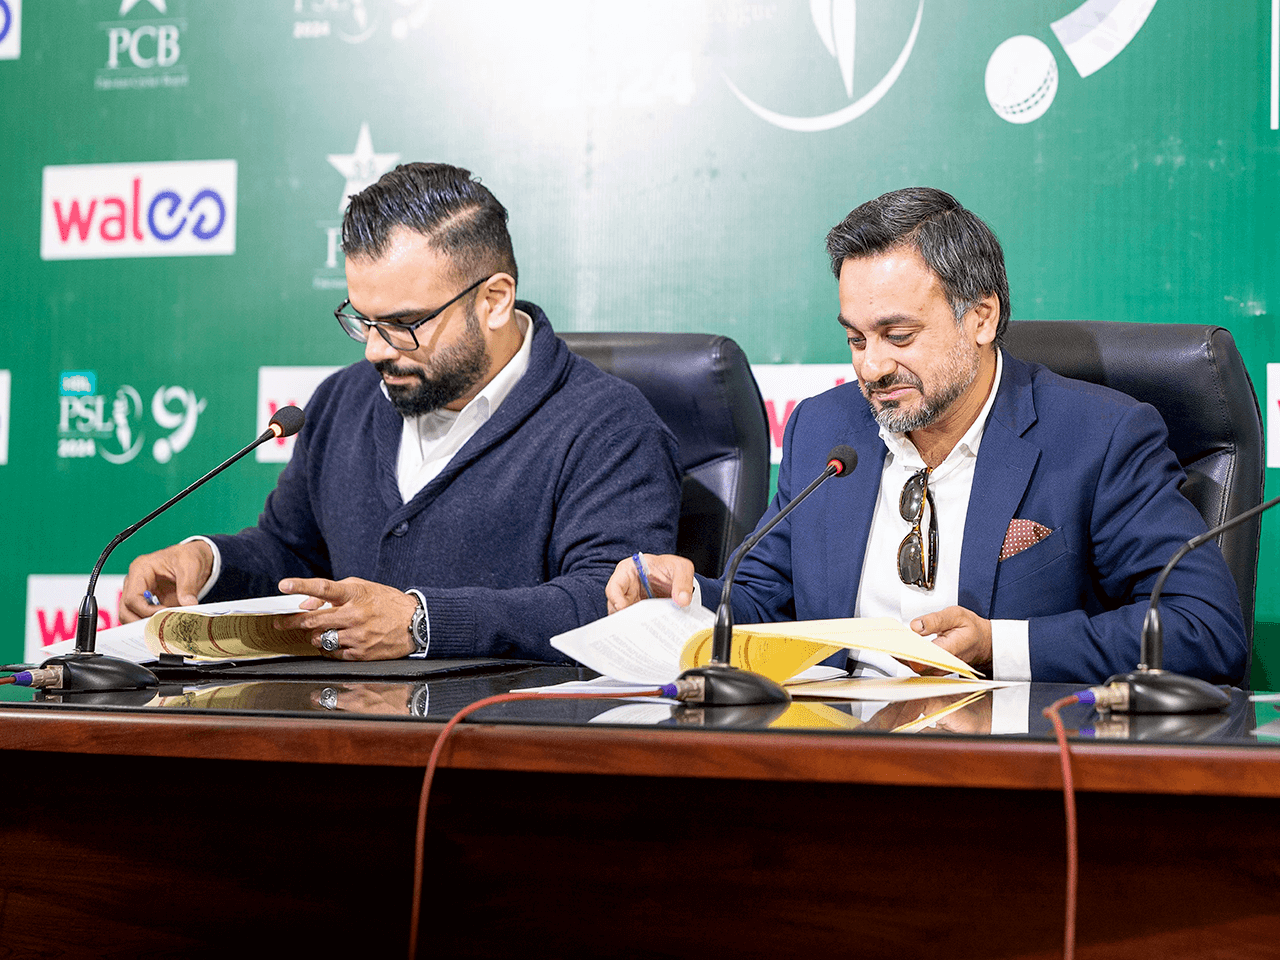 PCB and Walee Signed Deal For Digital Broadcasting